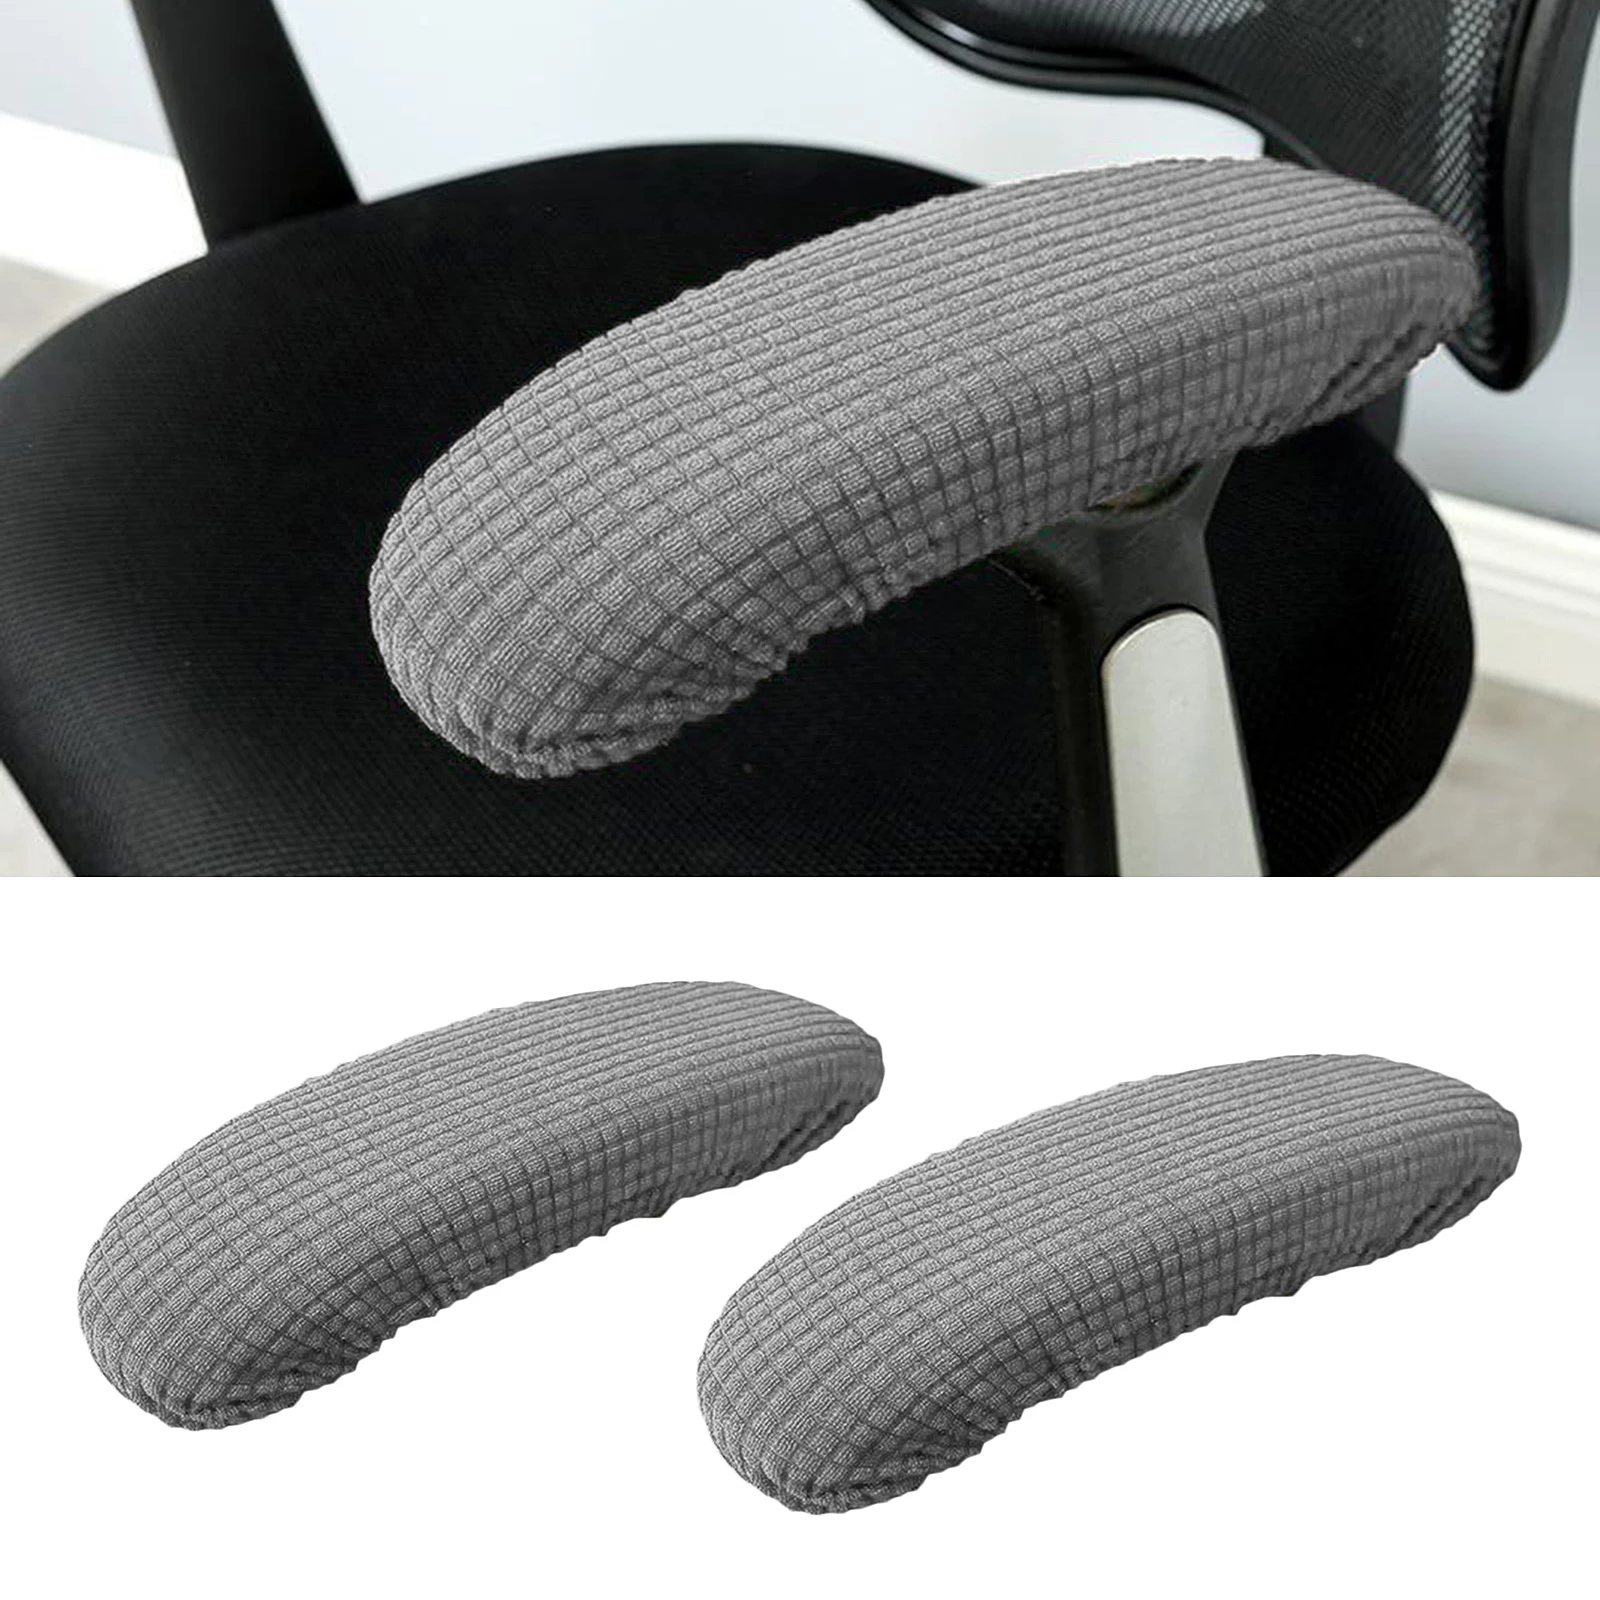 2pcs Chair Armrest Covers For Home Office Chairs For Elbow Polyester Armrest Slip Proof Sleeve Chair Arms Cover